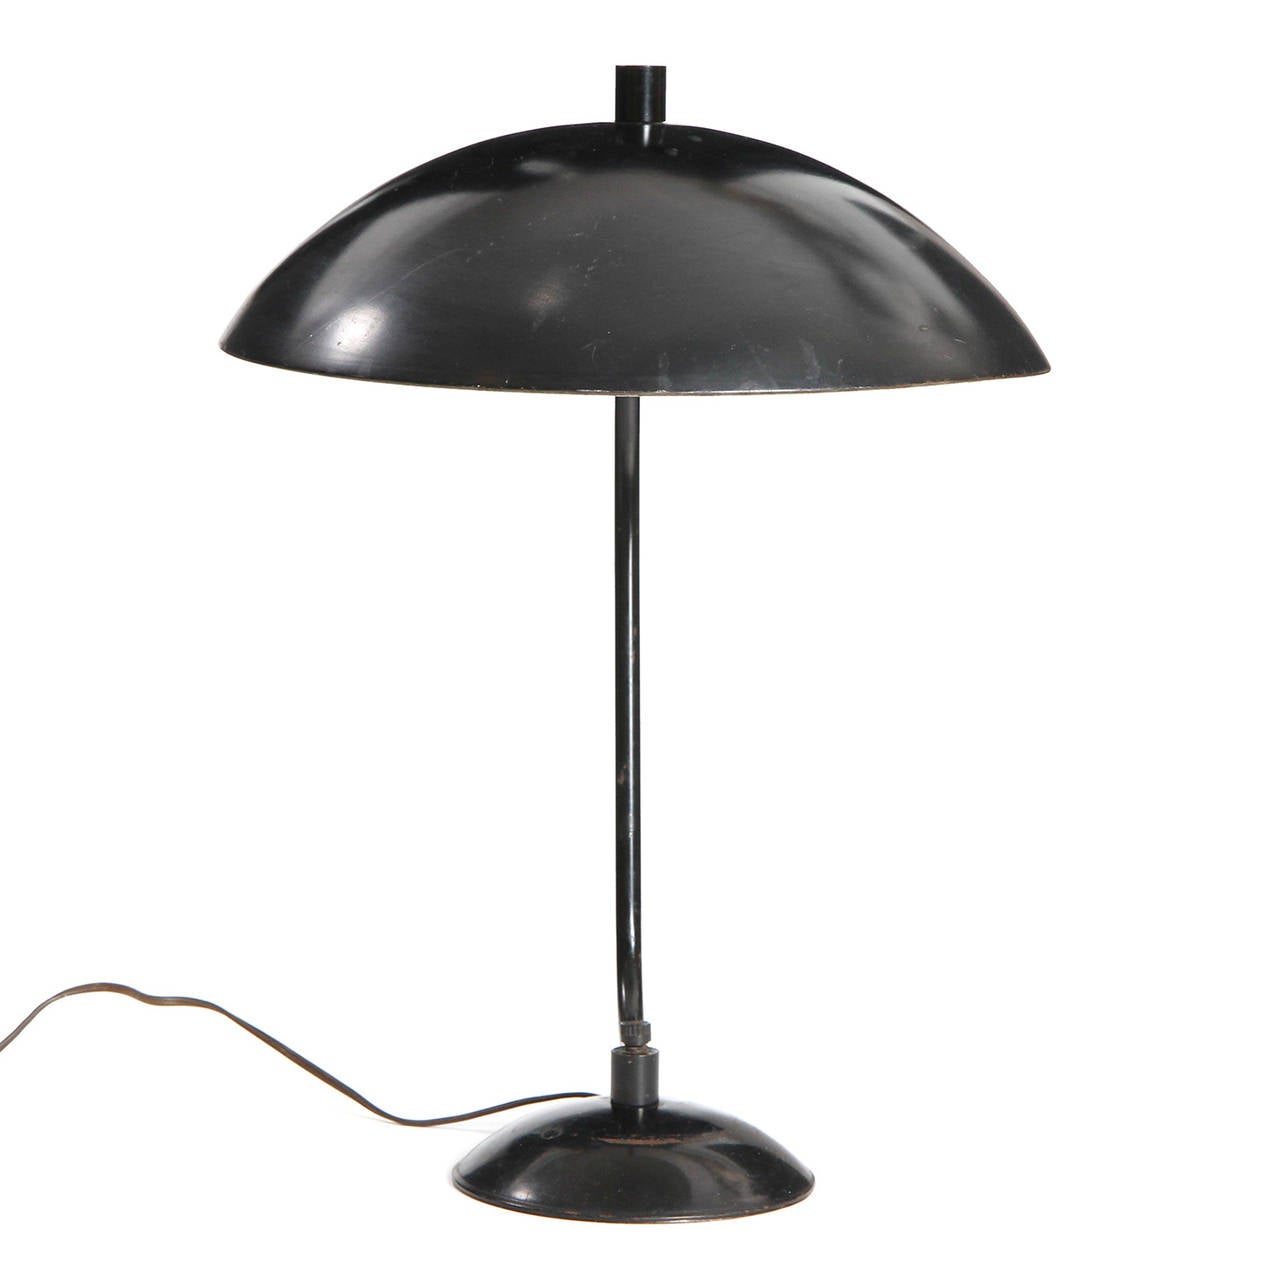 A modernist table lamp having a hemispheric shade suspended from a spare and sculptural tubular steel arm that rises from a weighted disc base.